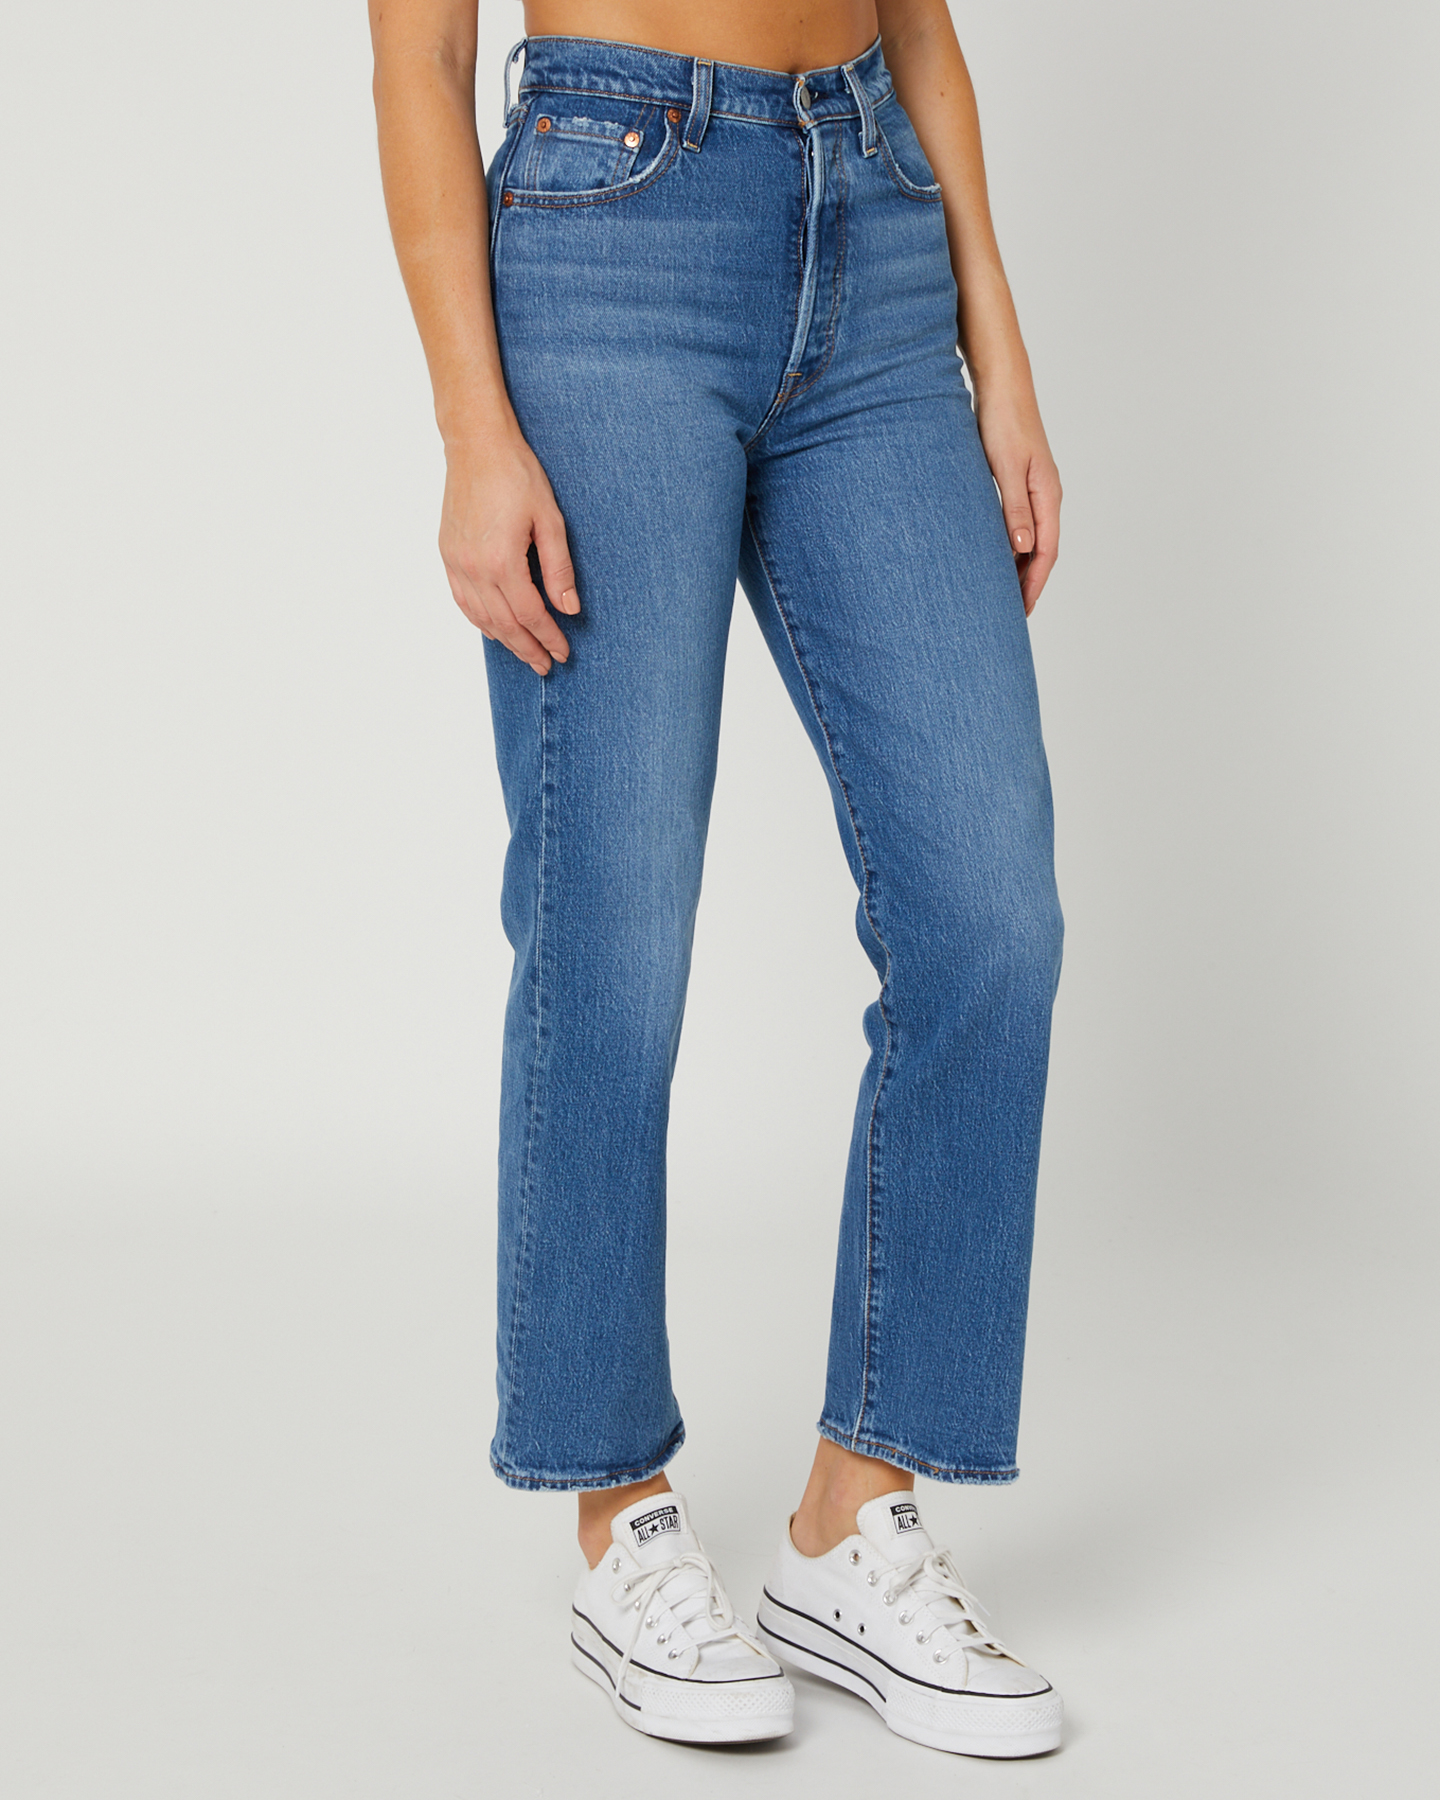 Levi's Ribcage Straight Ankle Jean - Jazz Jive Together | SurfStitch